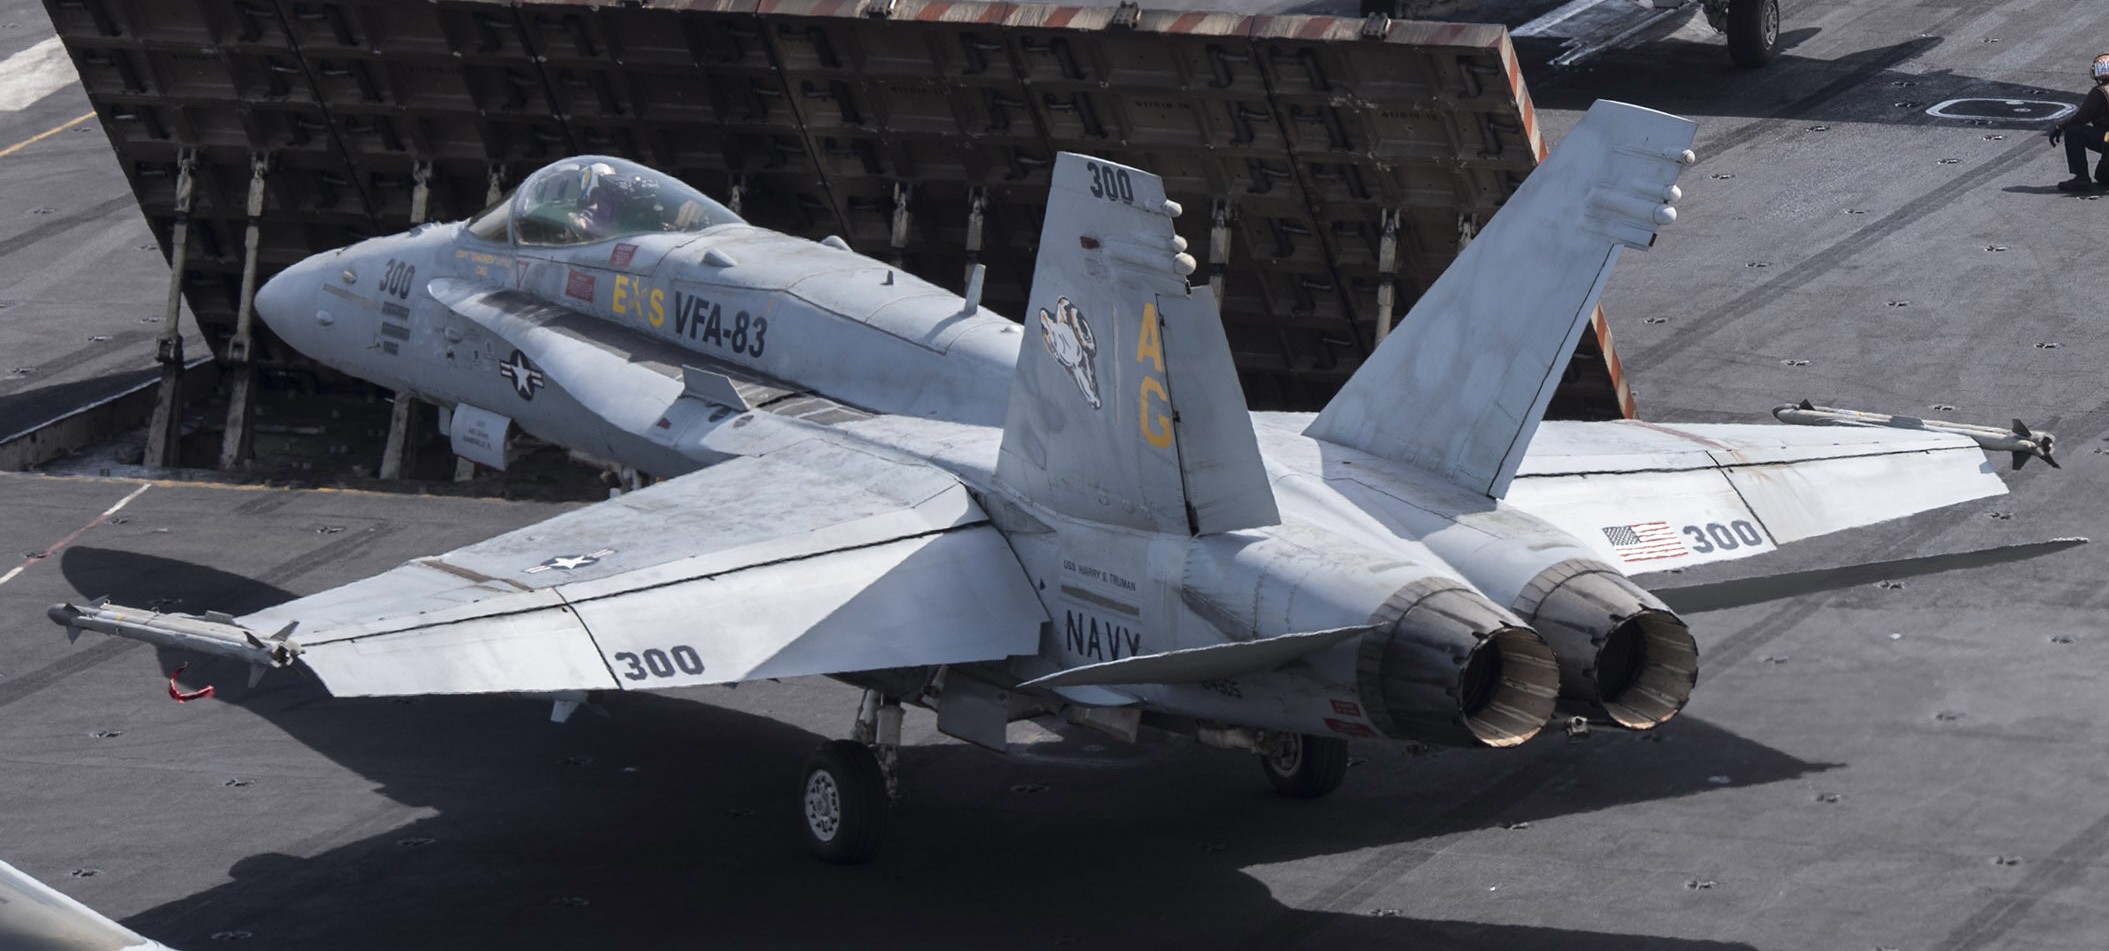 vfa-83 rampagers strike fighter squadron f/a-18c hornet cvw-7 uss harry s. truman cvn-75 39